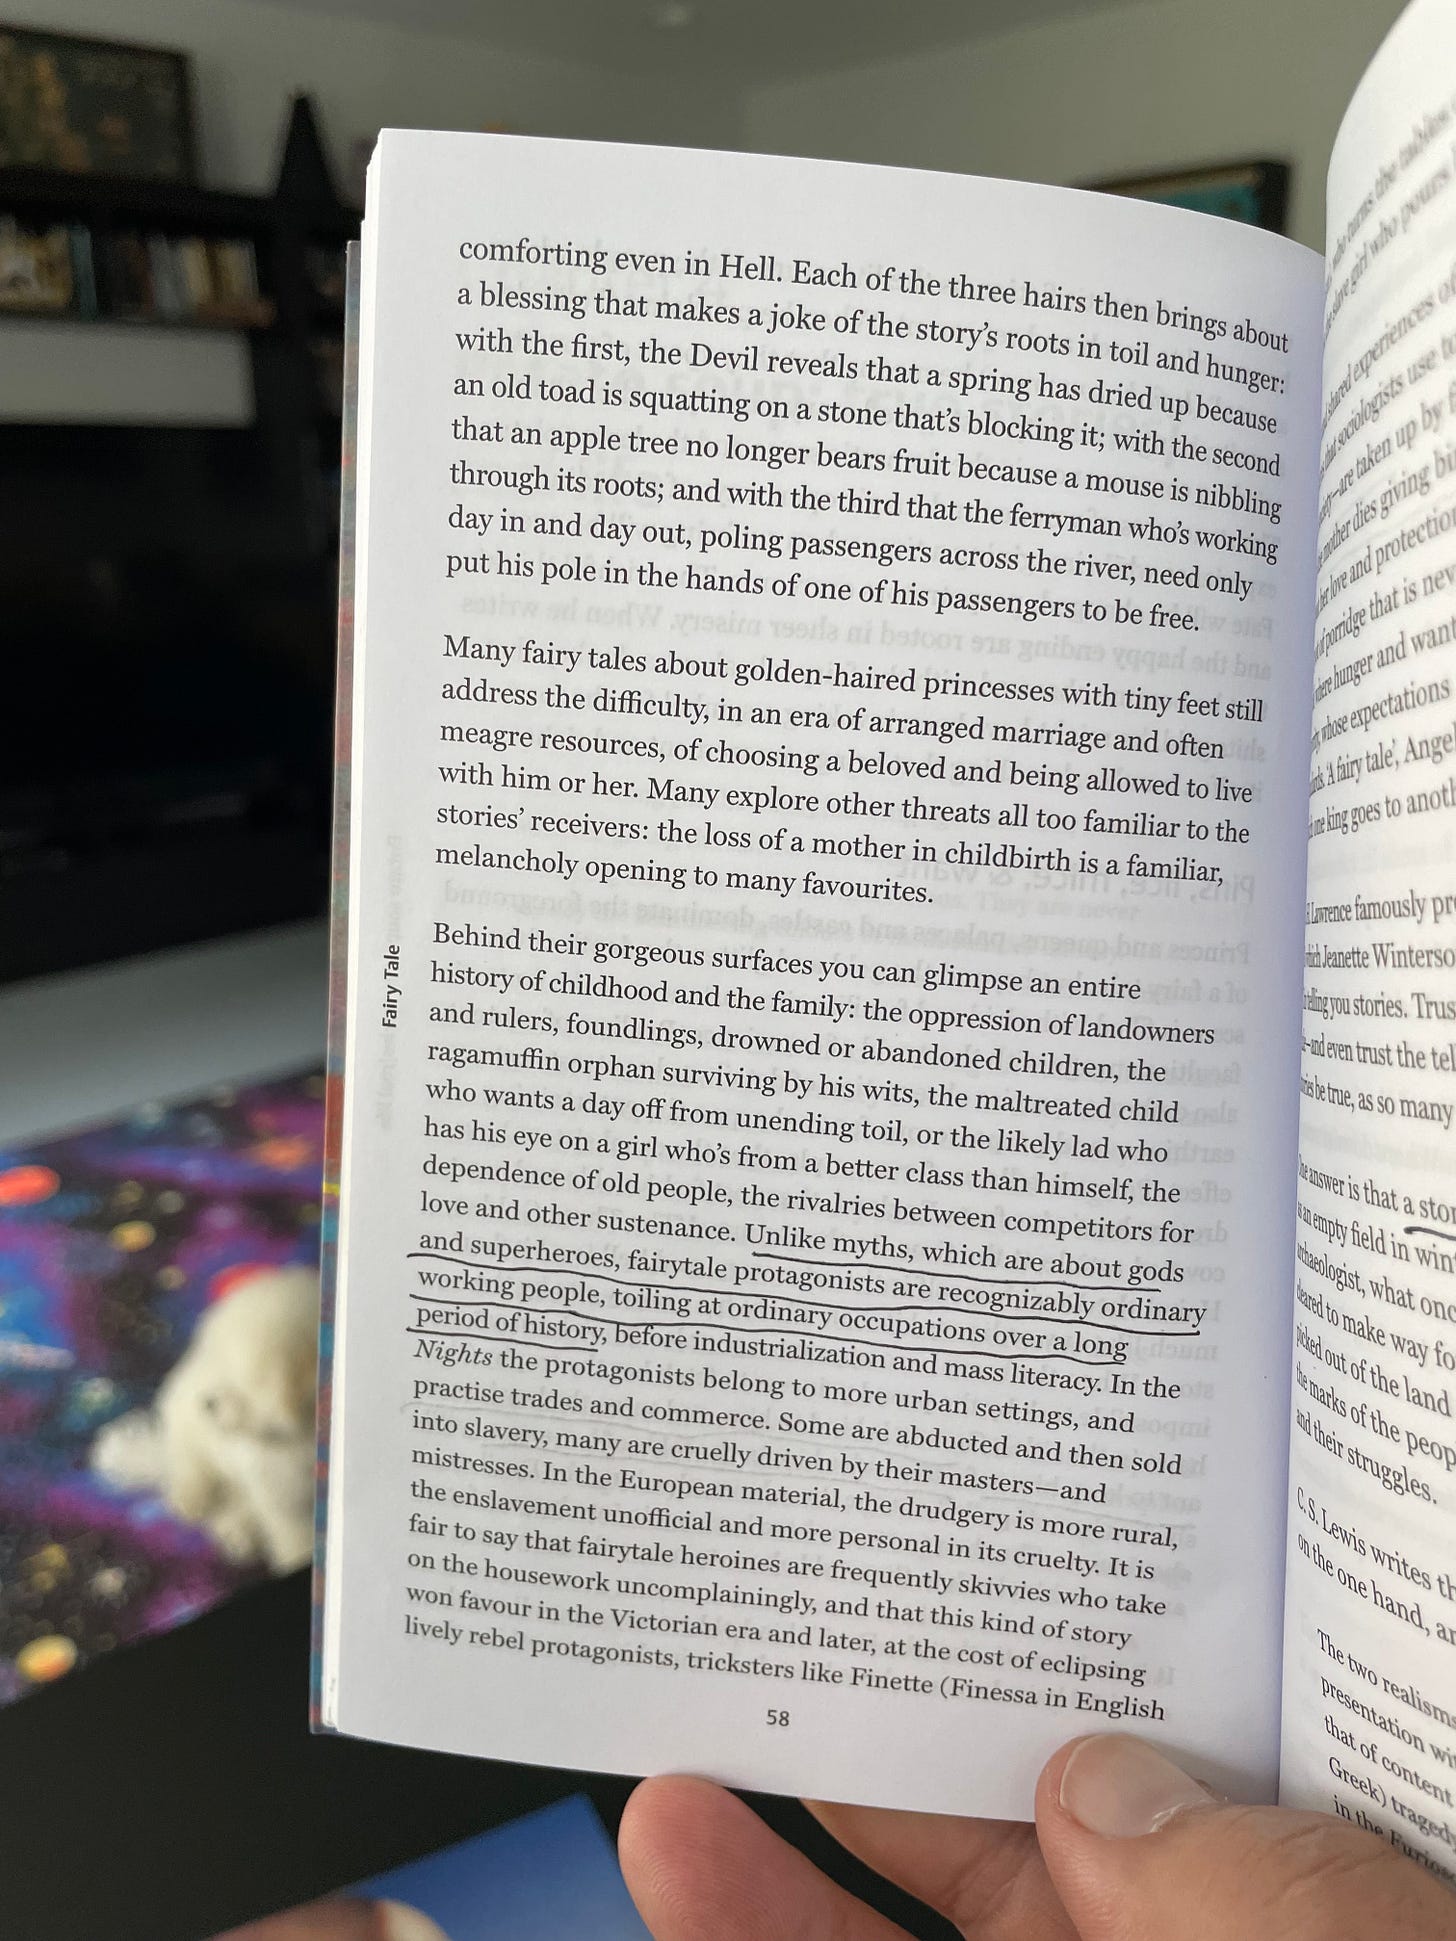 A picture of a couple of pages from the book, with the underlined section that says, "Unlike myths, which are about gods and superheroes, fairytale protagonists are recognizably ordinary, working people, tolling at ordinary occupations over a long period of  history."